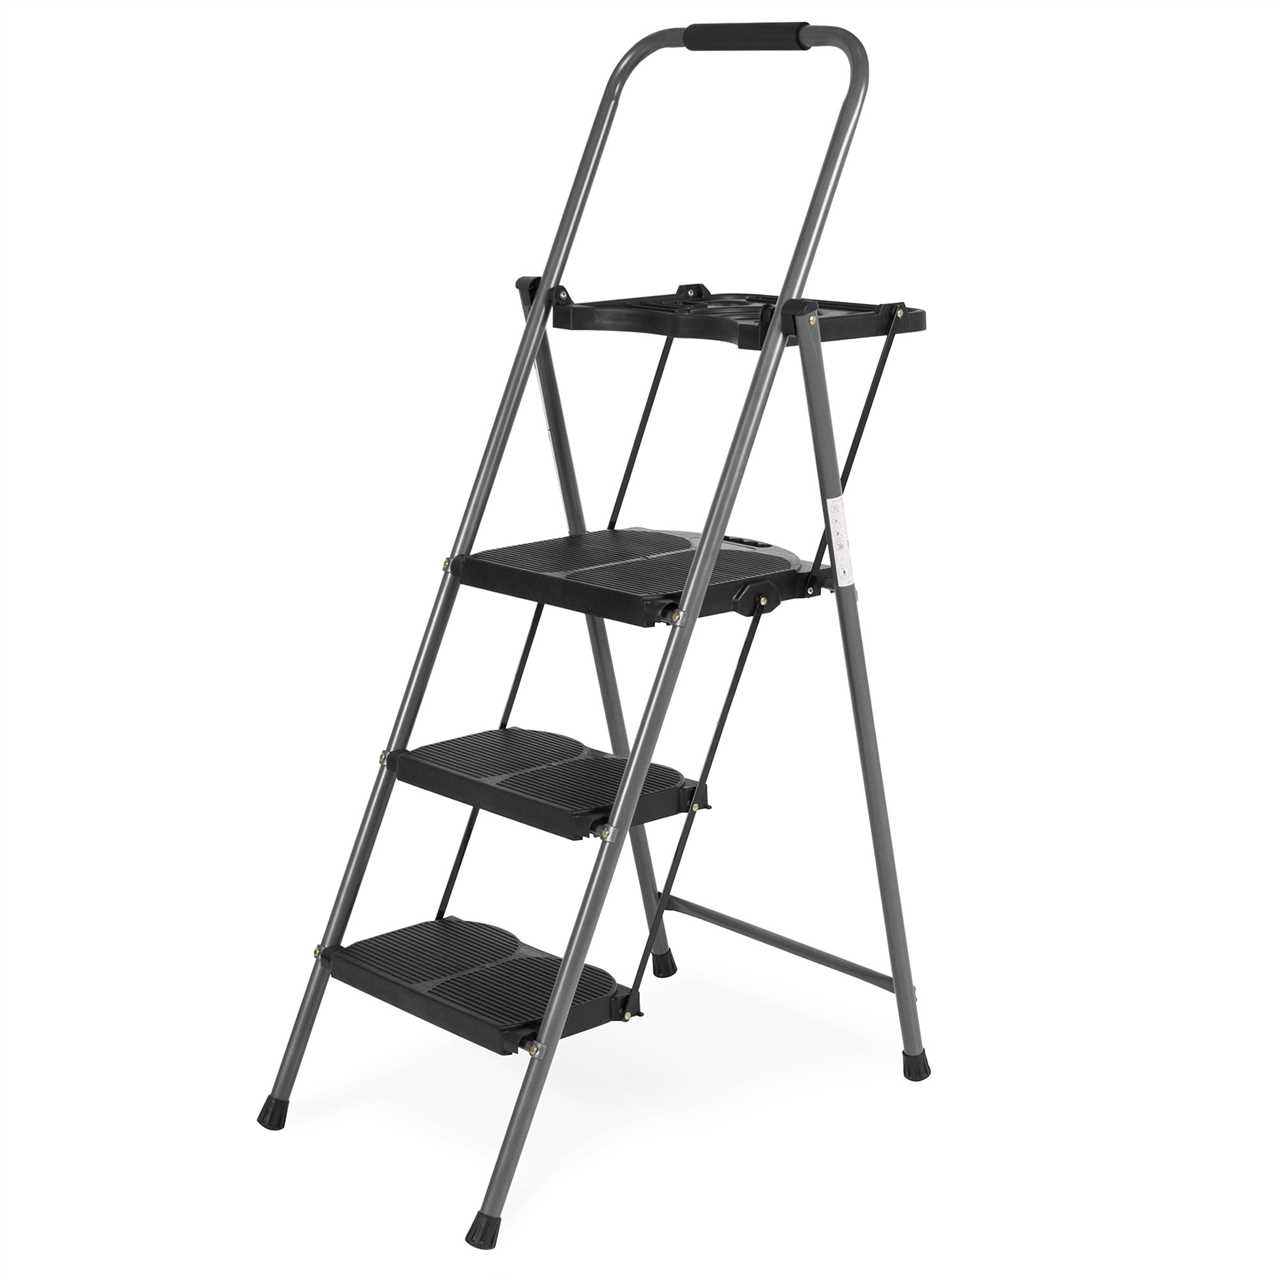 Why Aluminum Ladders are the Best Choice for Home Improvement Projects